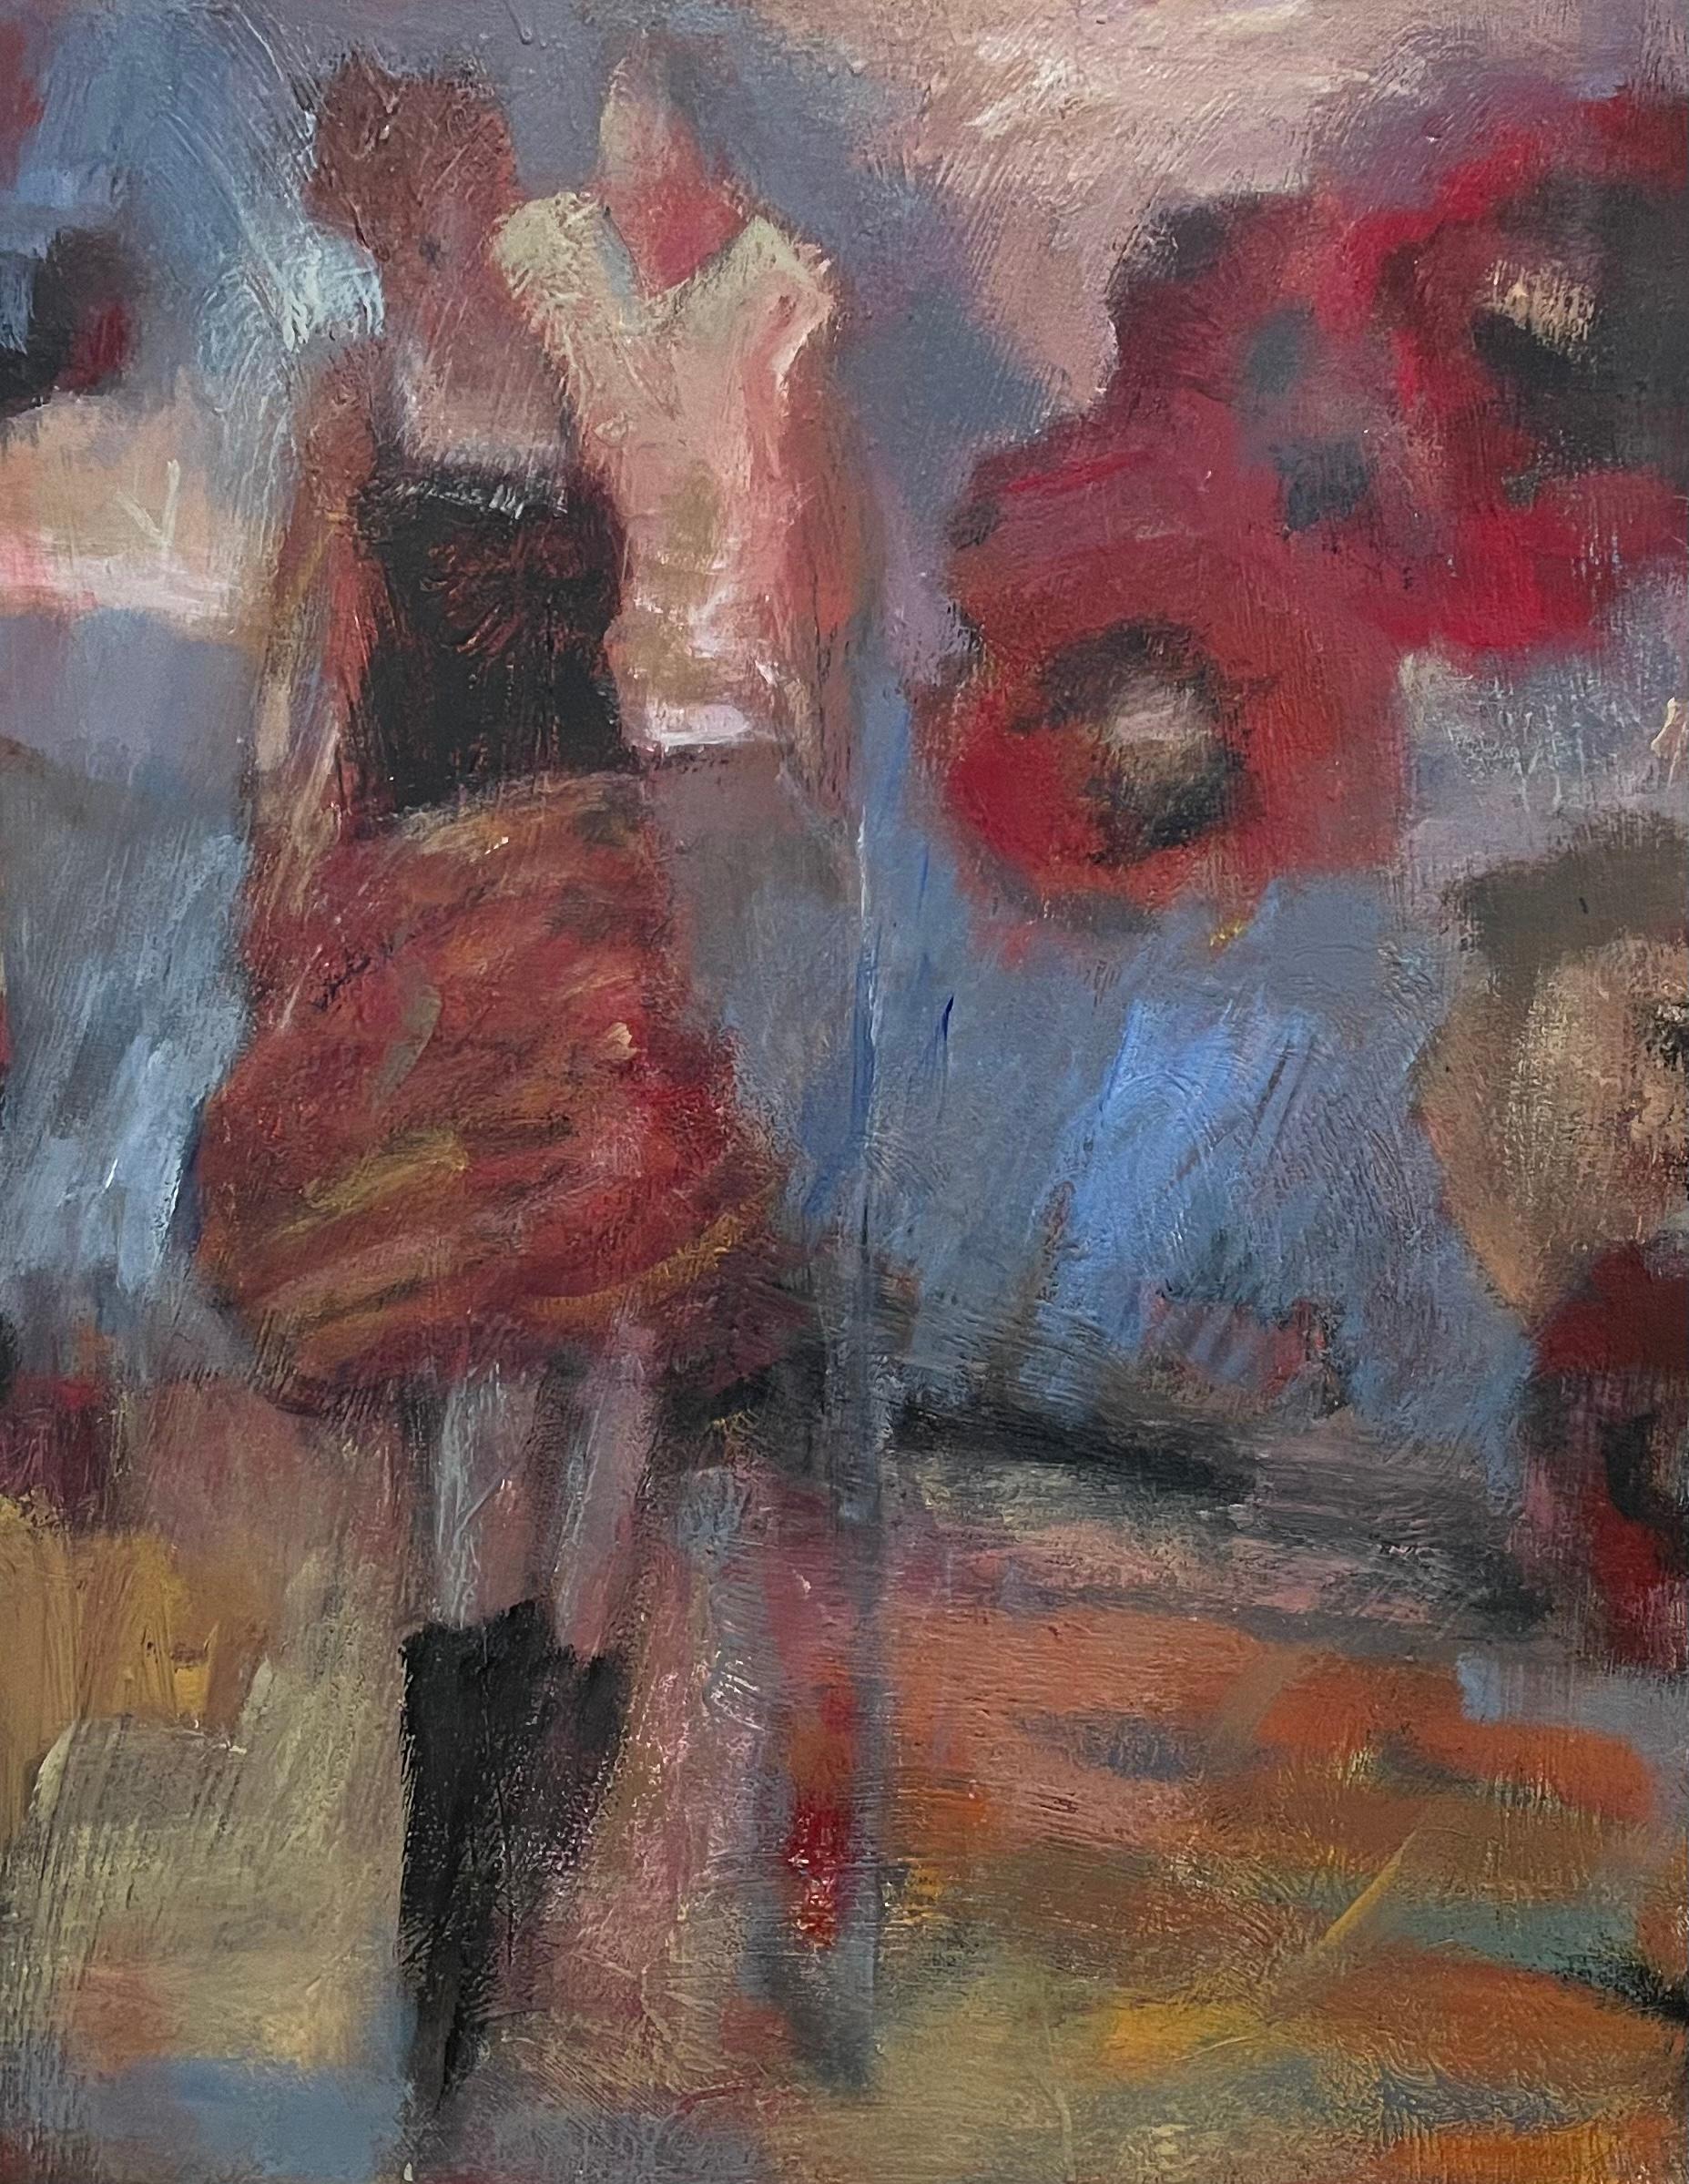 "Woman in Red" is a stirring 30" x 24" mixed media piece by Helen Steele that delves into the heart of contemporary expressionism. Steele's canvas is a whirlwind of emotion, articulated through bold strokes of crimson, deep blues, and earthy browns